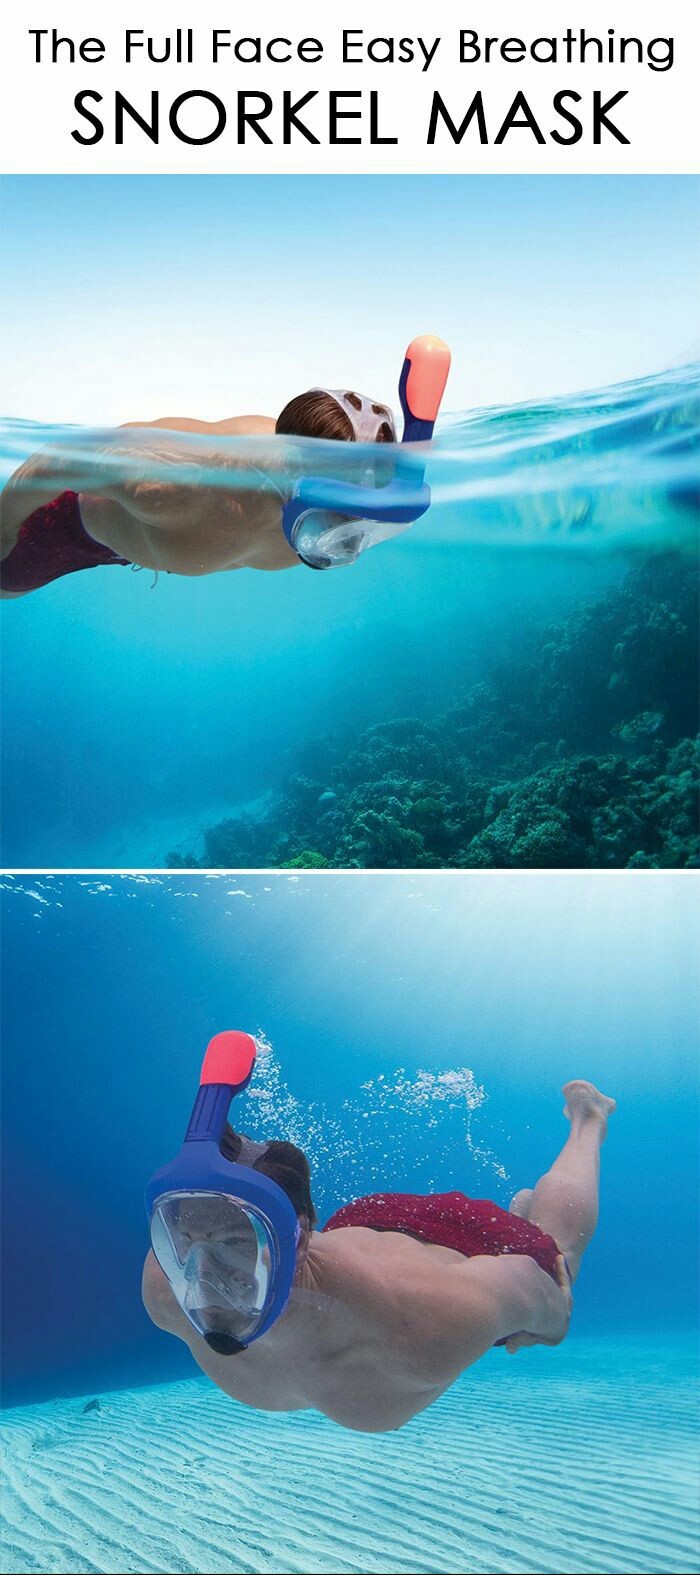 Swimming mask - Mask, Sea, Ocean, Swimming, Relaxation, Under the water, Pinterest, Longpost